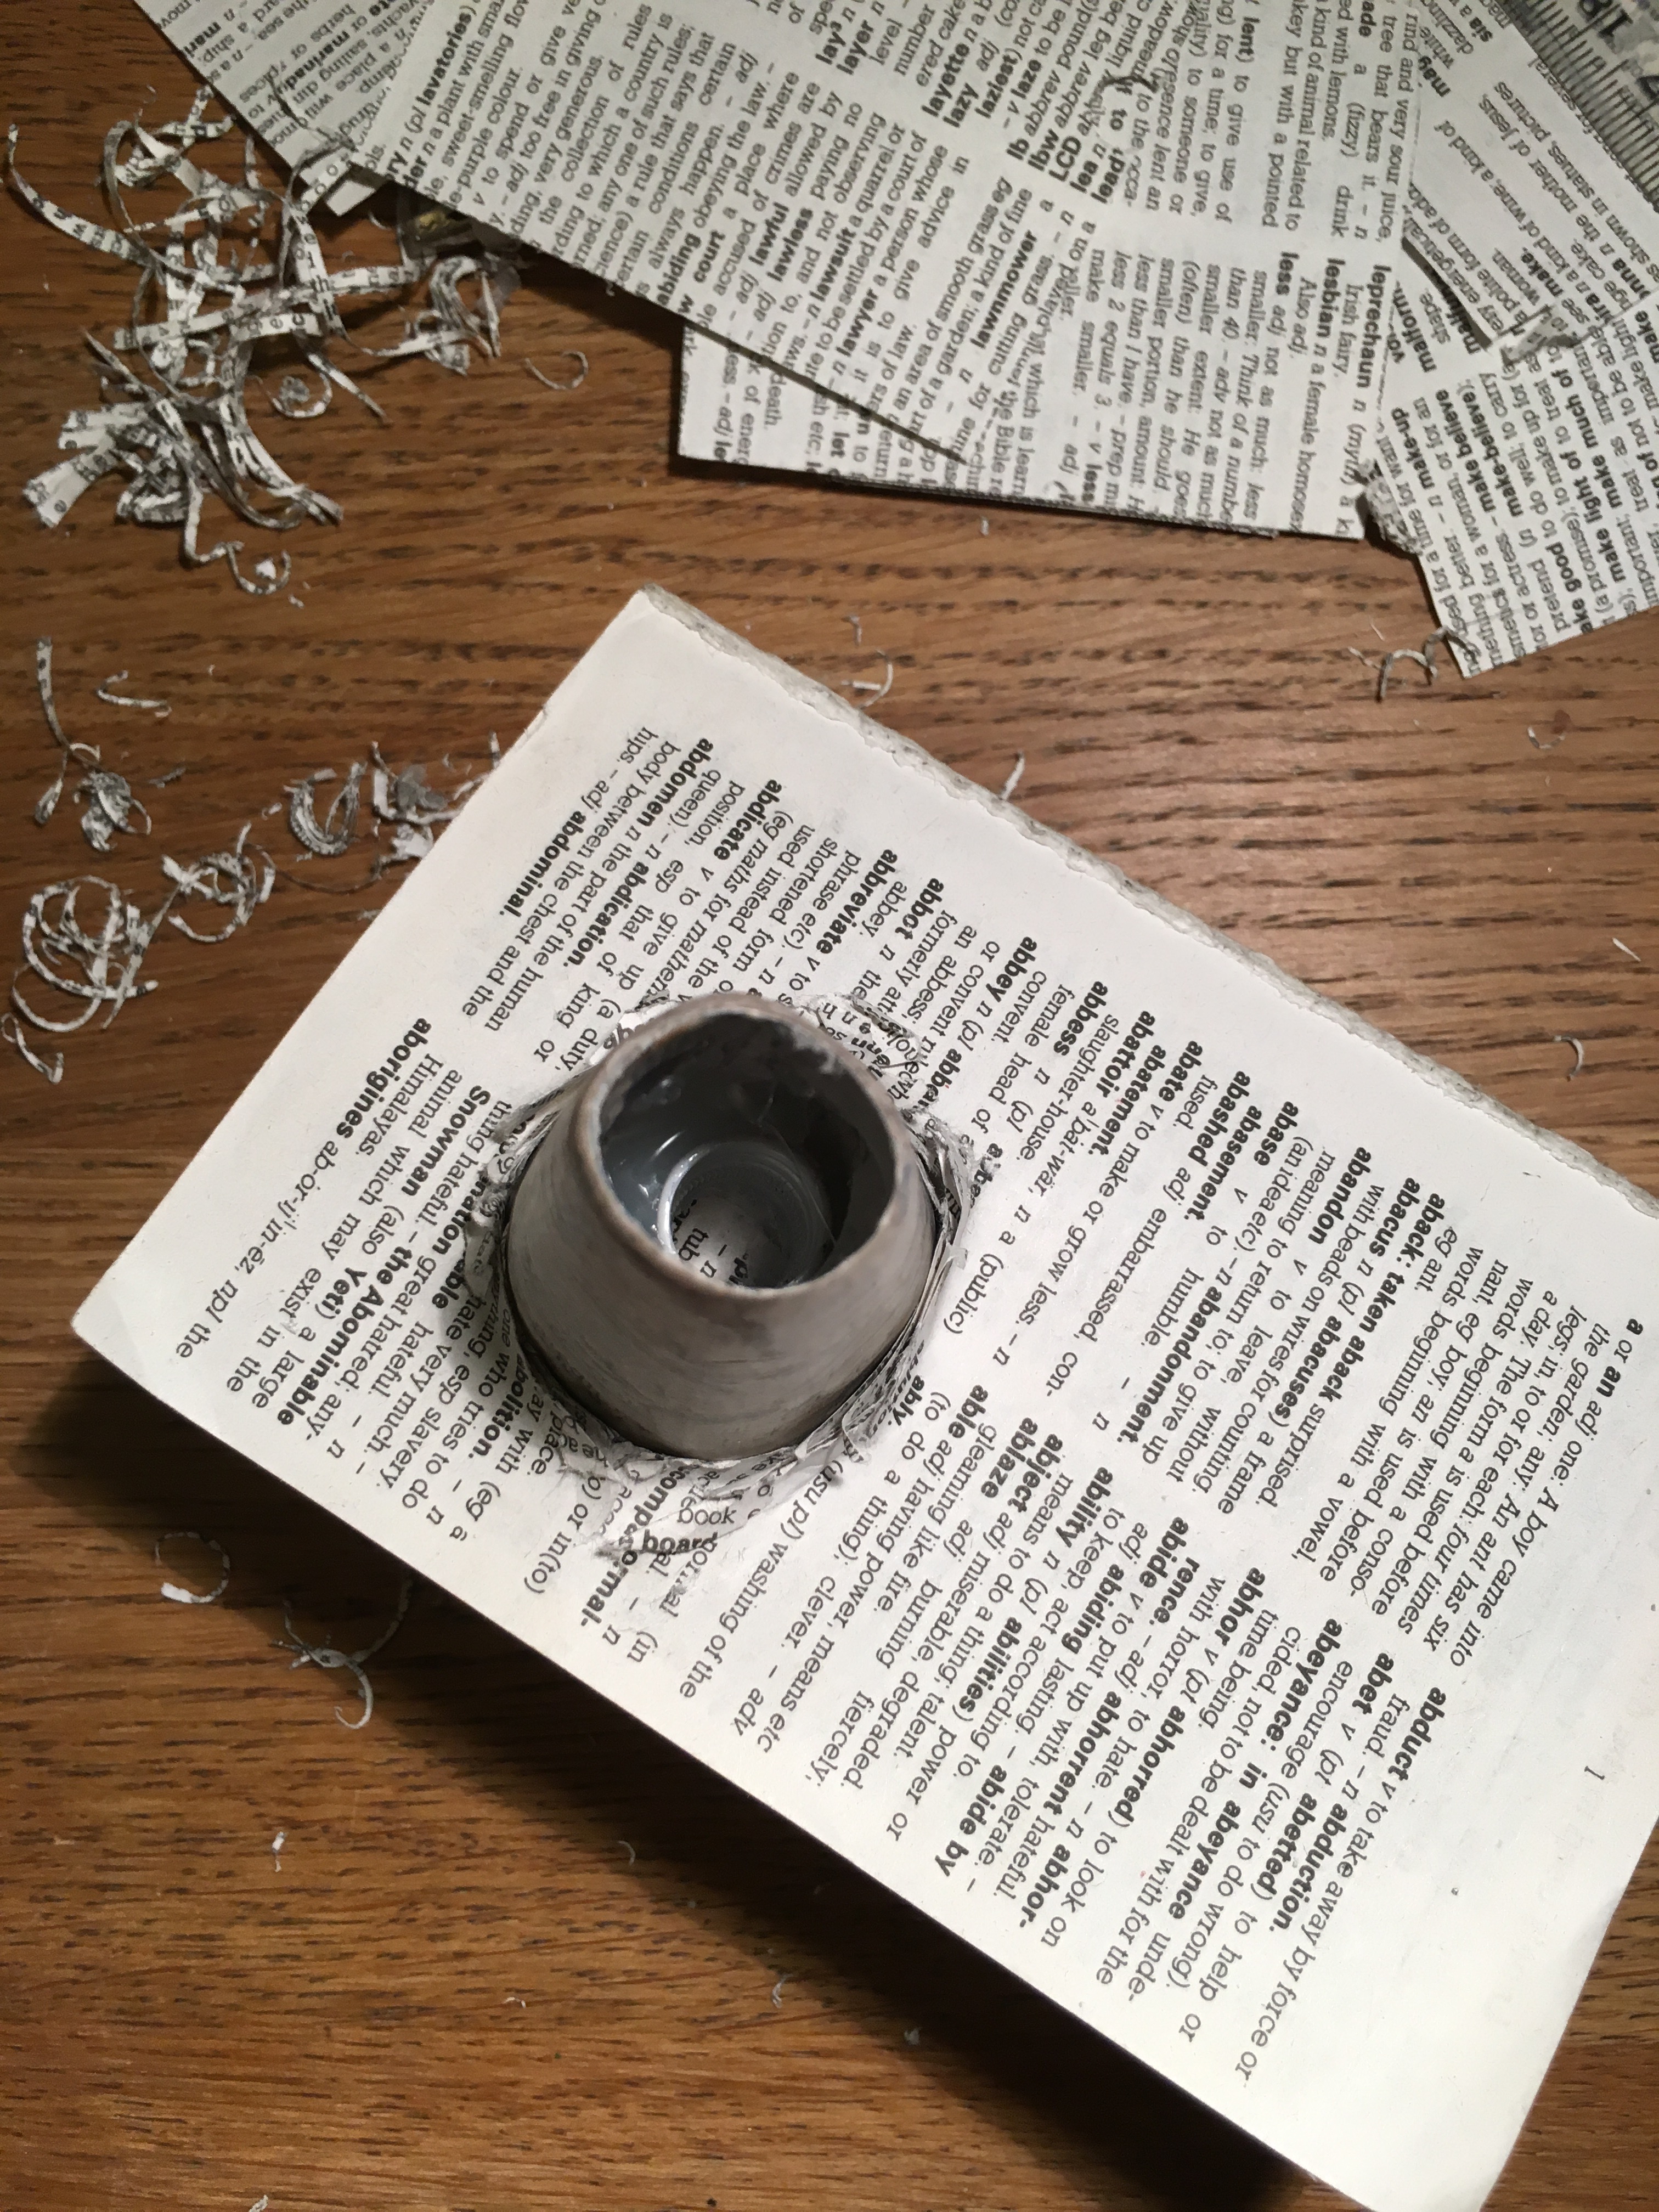 Looking down at a dictionary with a papier-mâché upright sticking out of it, surrounded by paper scraps